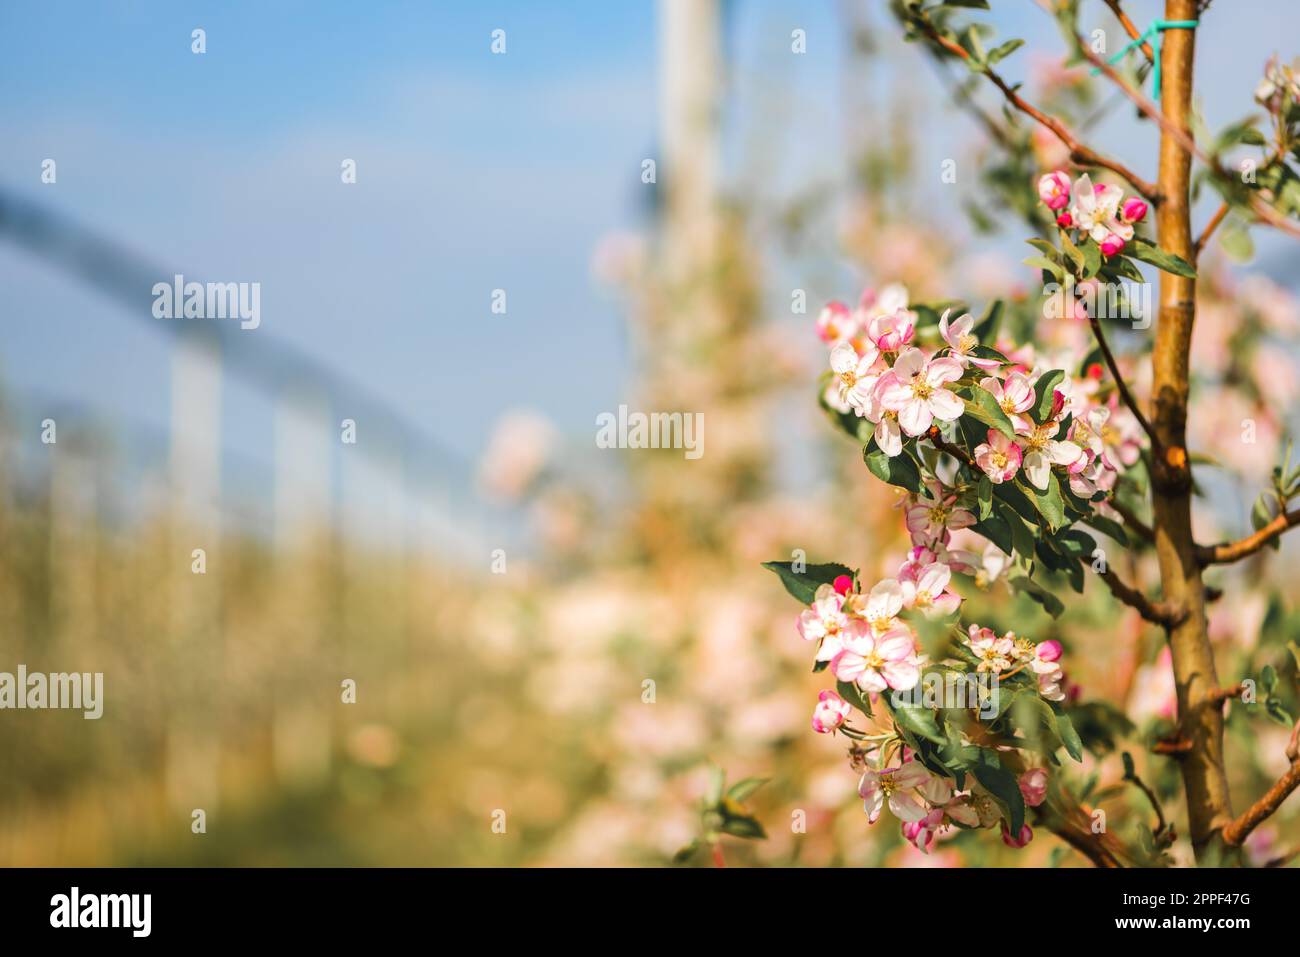 Apple fruit orchard with trees in bloom, diminishing perspective Stock Photo